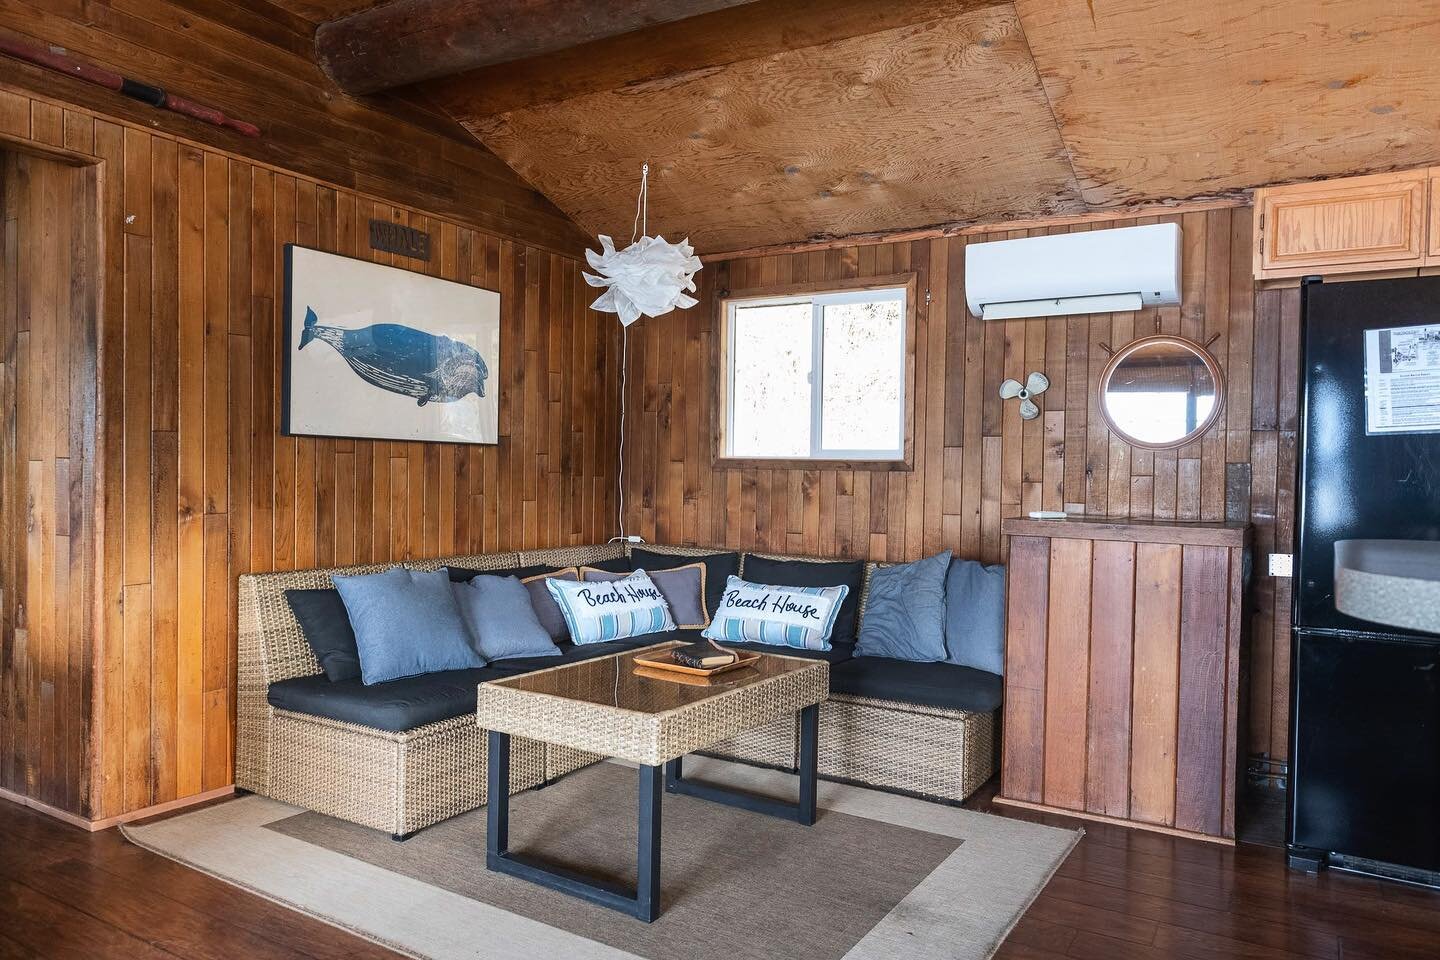 Really vib&rsquo;in the Boat House 😍 My personal favorite (if I had to pick). This gorgeous cabin (that sits right on top of the water when the tide is in) is available to rent Aug 31! 

https://www.sunsetmarineresort.com/boat-house
.
.
.
#sequim #s